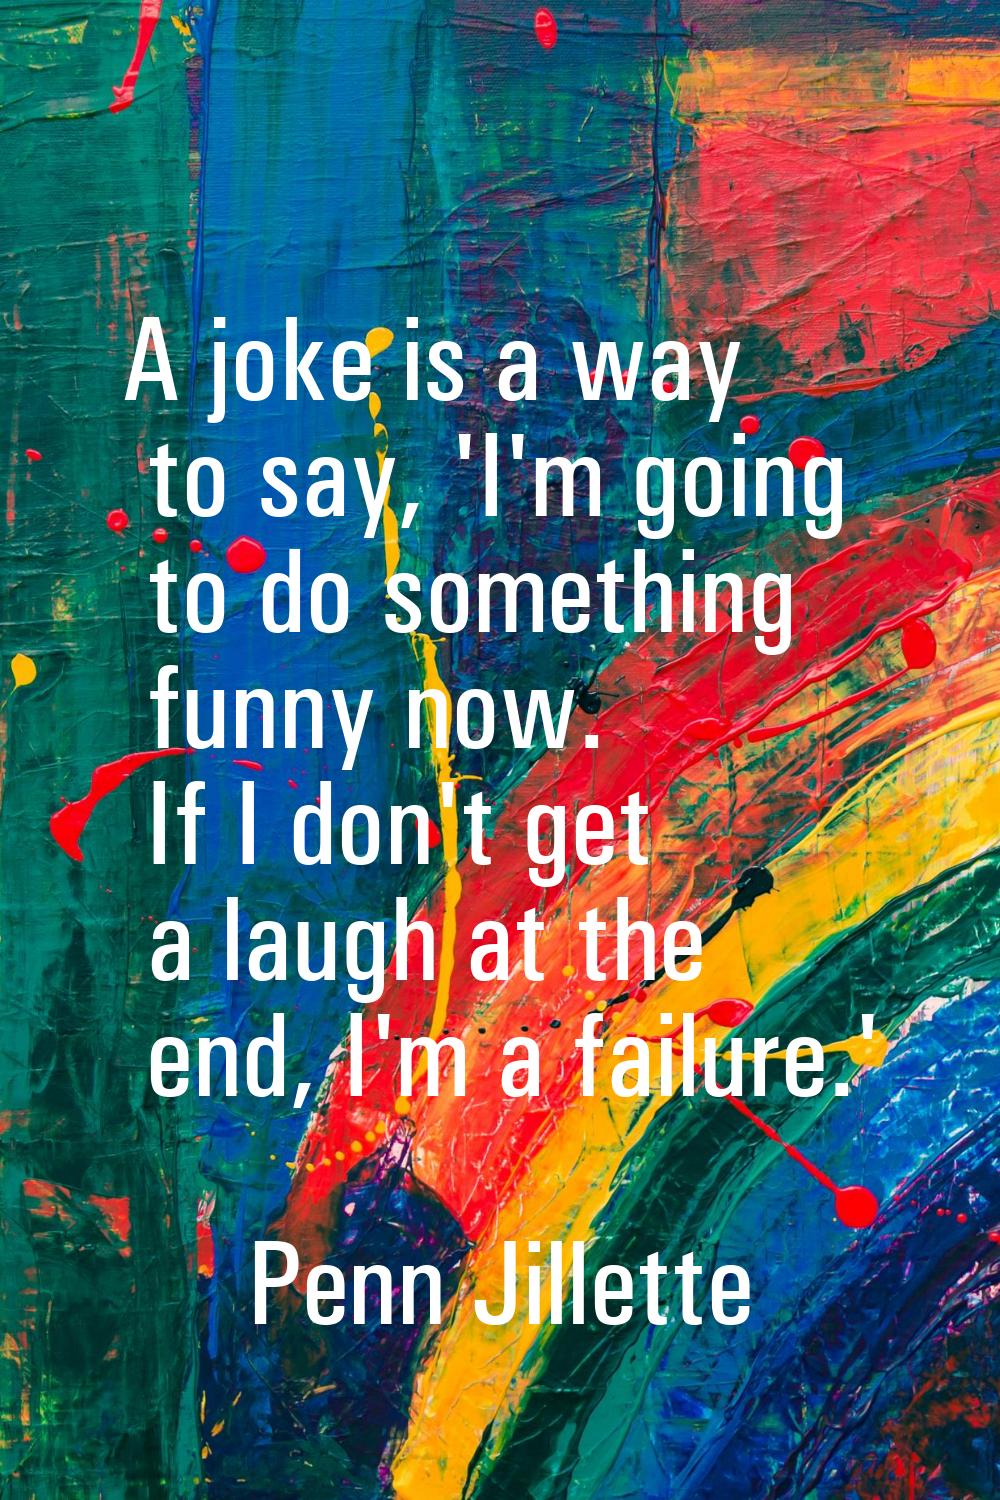 A joke is a way to say, 'I'm going to do something funny now. If I don't get a laugh at the end, I'